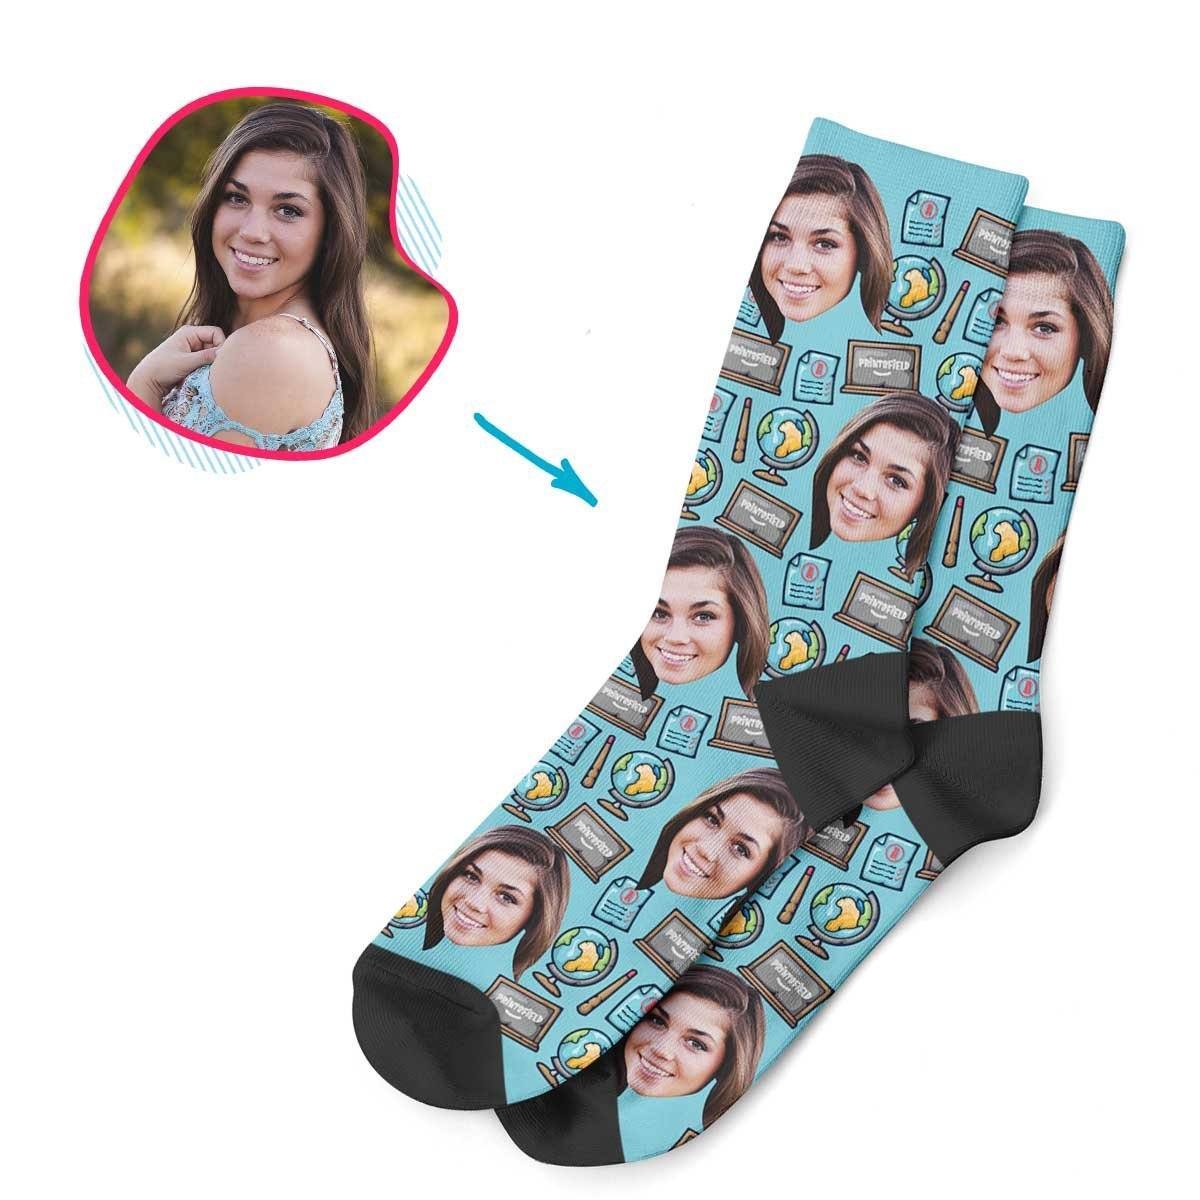 Blue Teacher personalized socks with photo of face printed on them